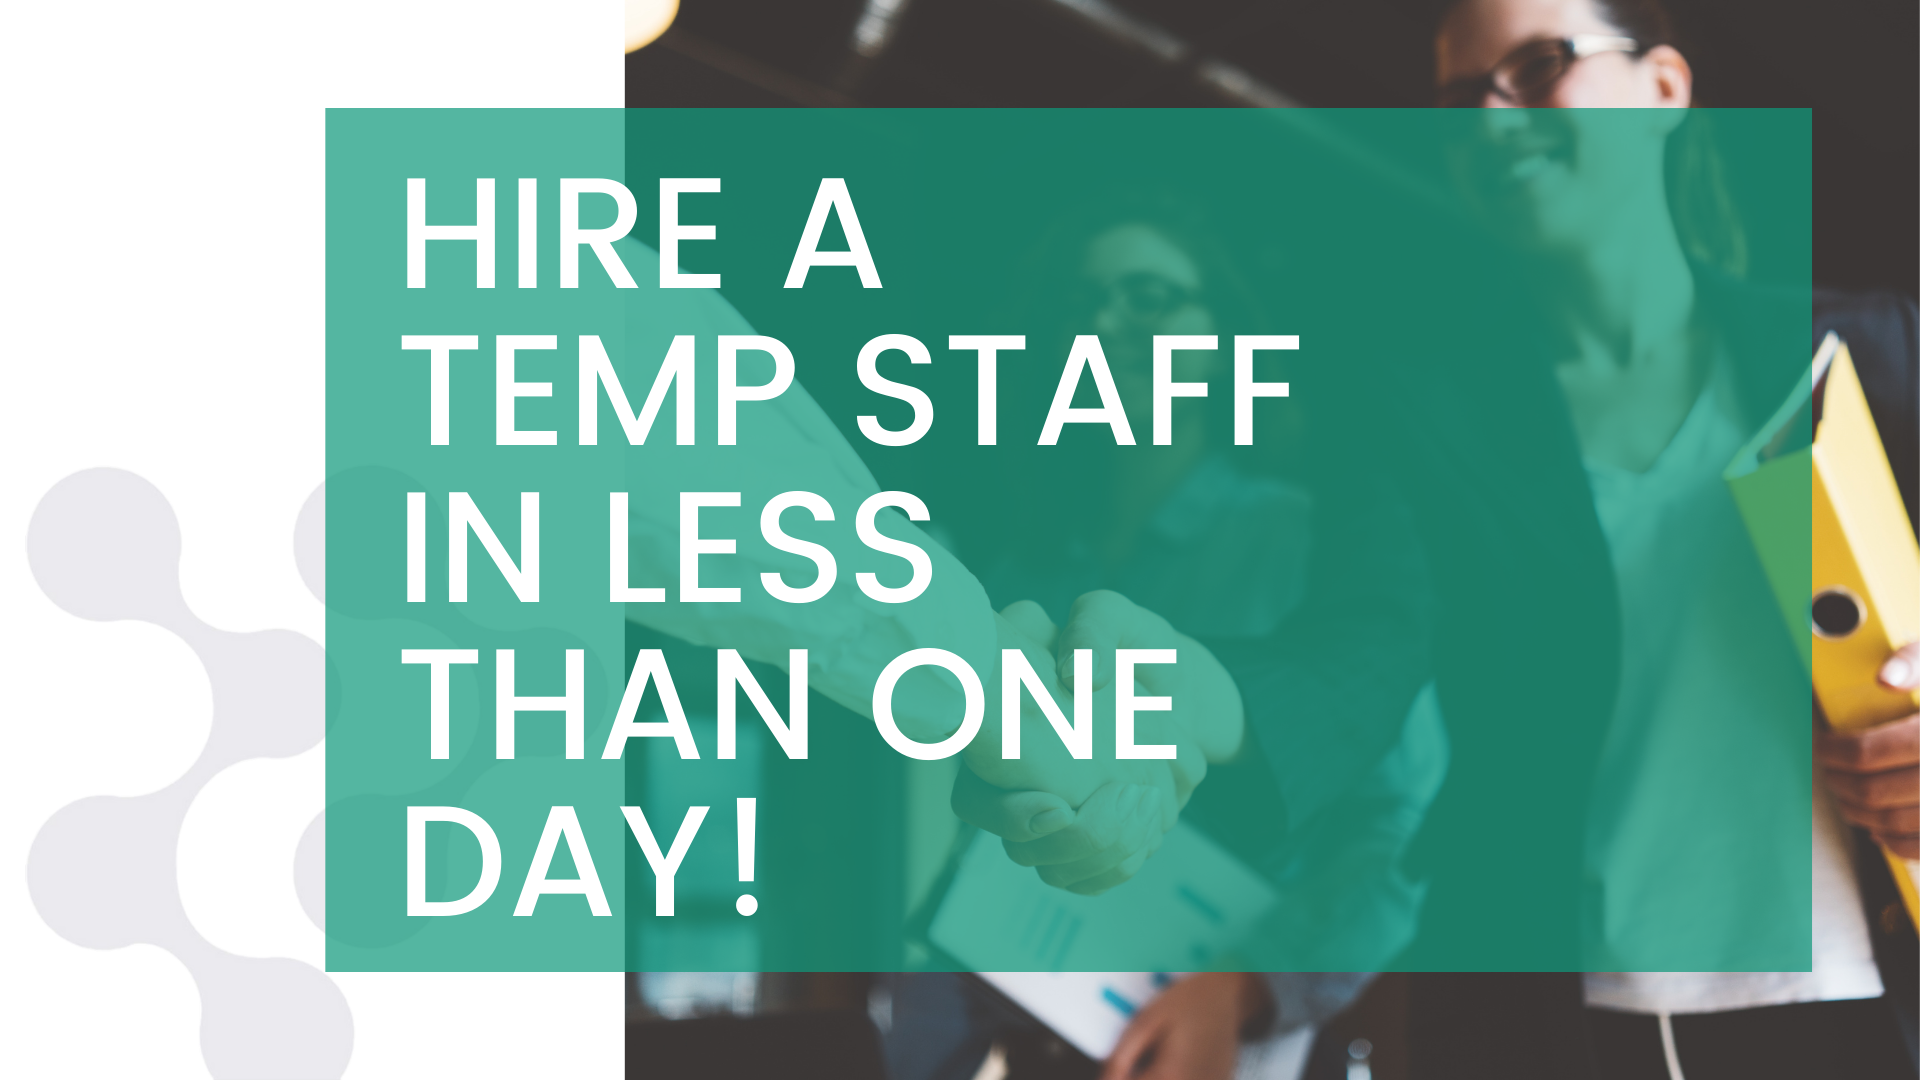 Hire a temp staff in less than one day